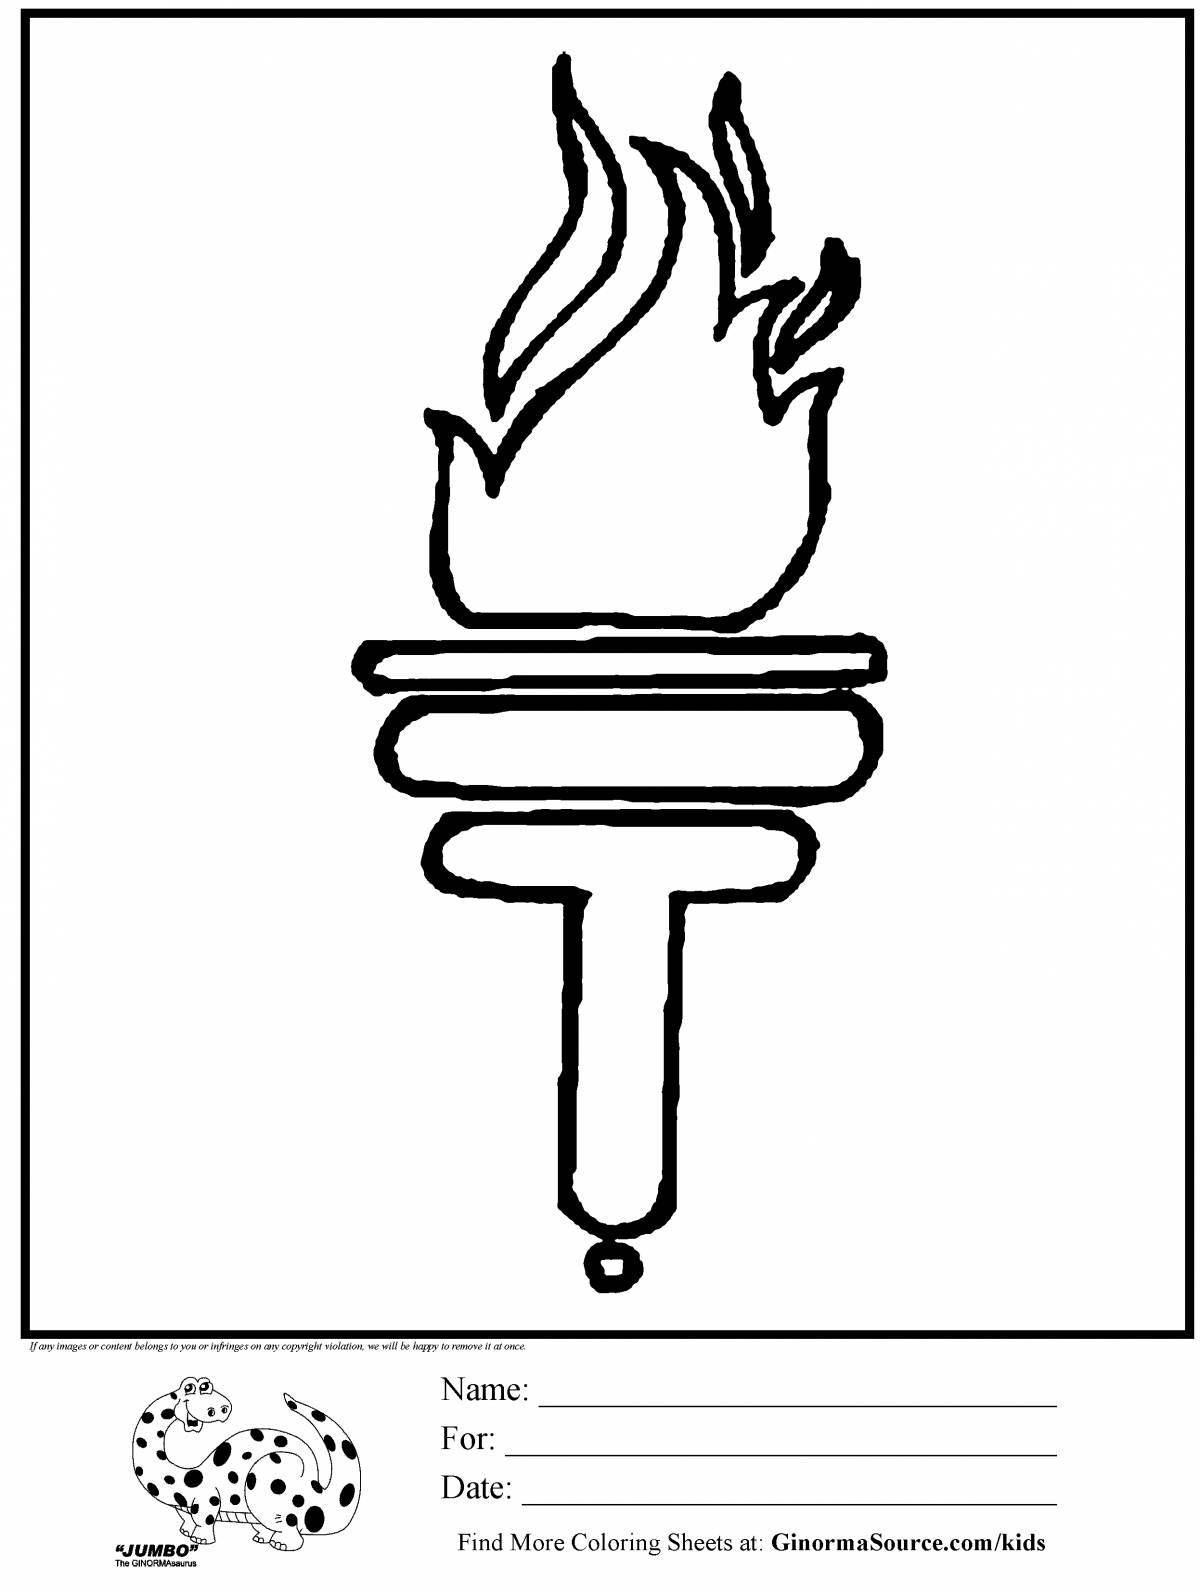 Happy torch coloring page